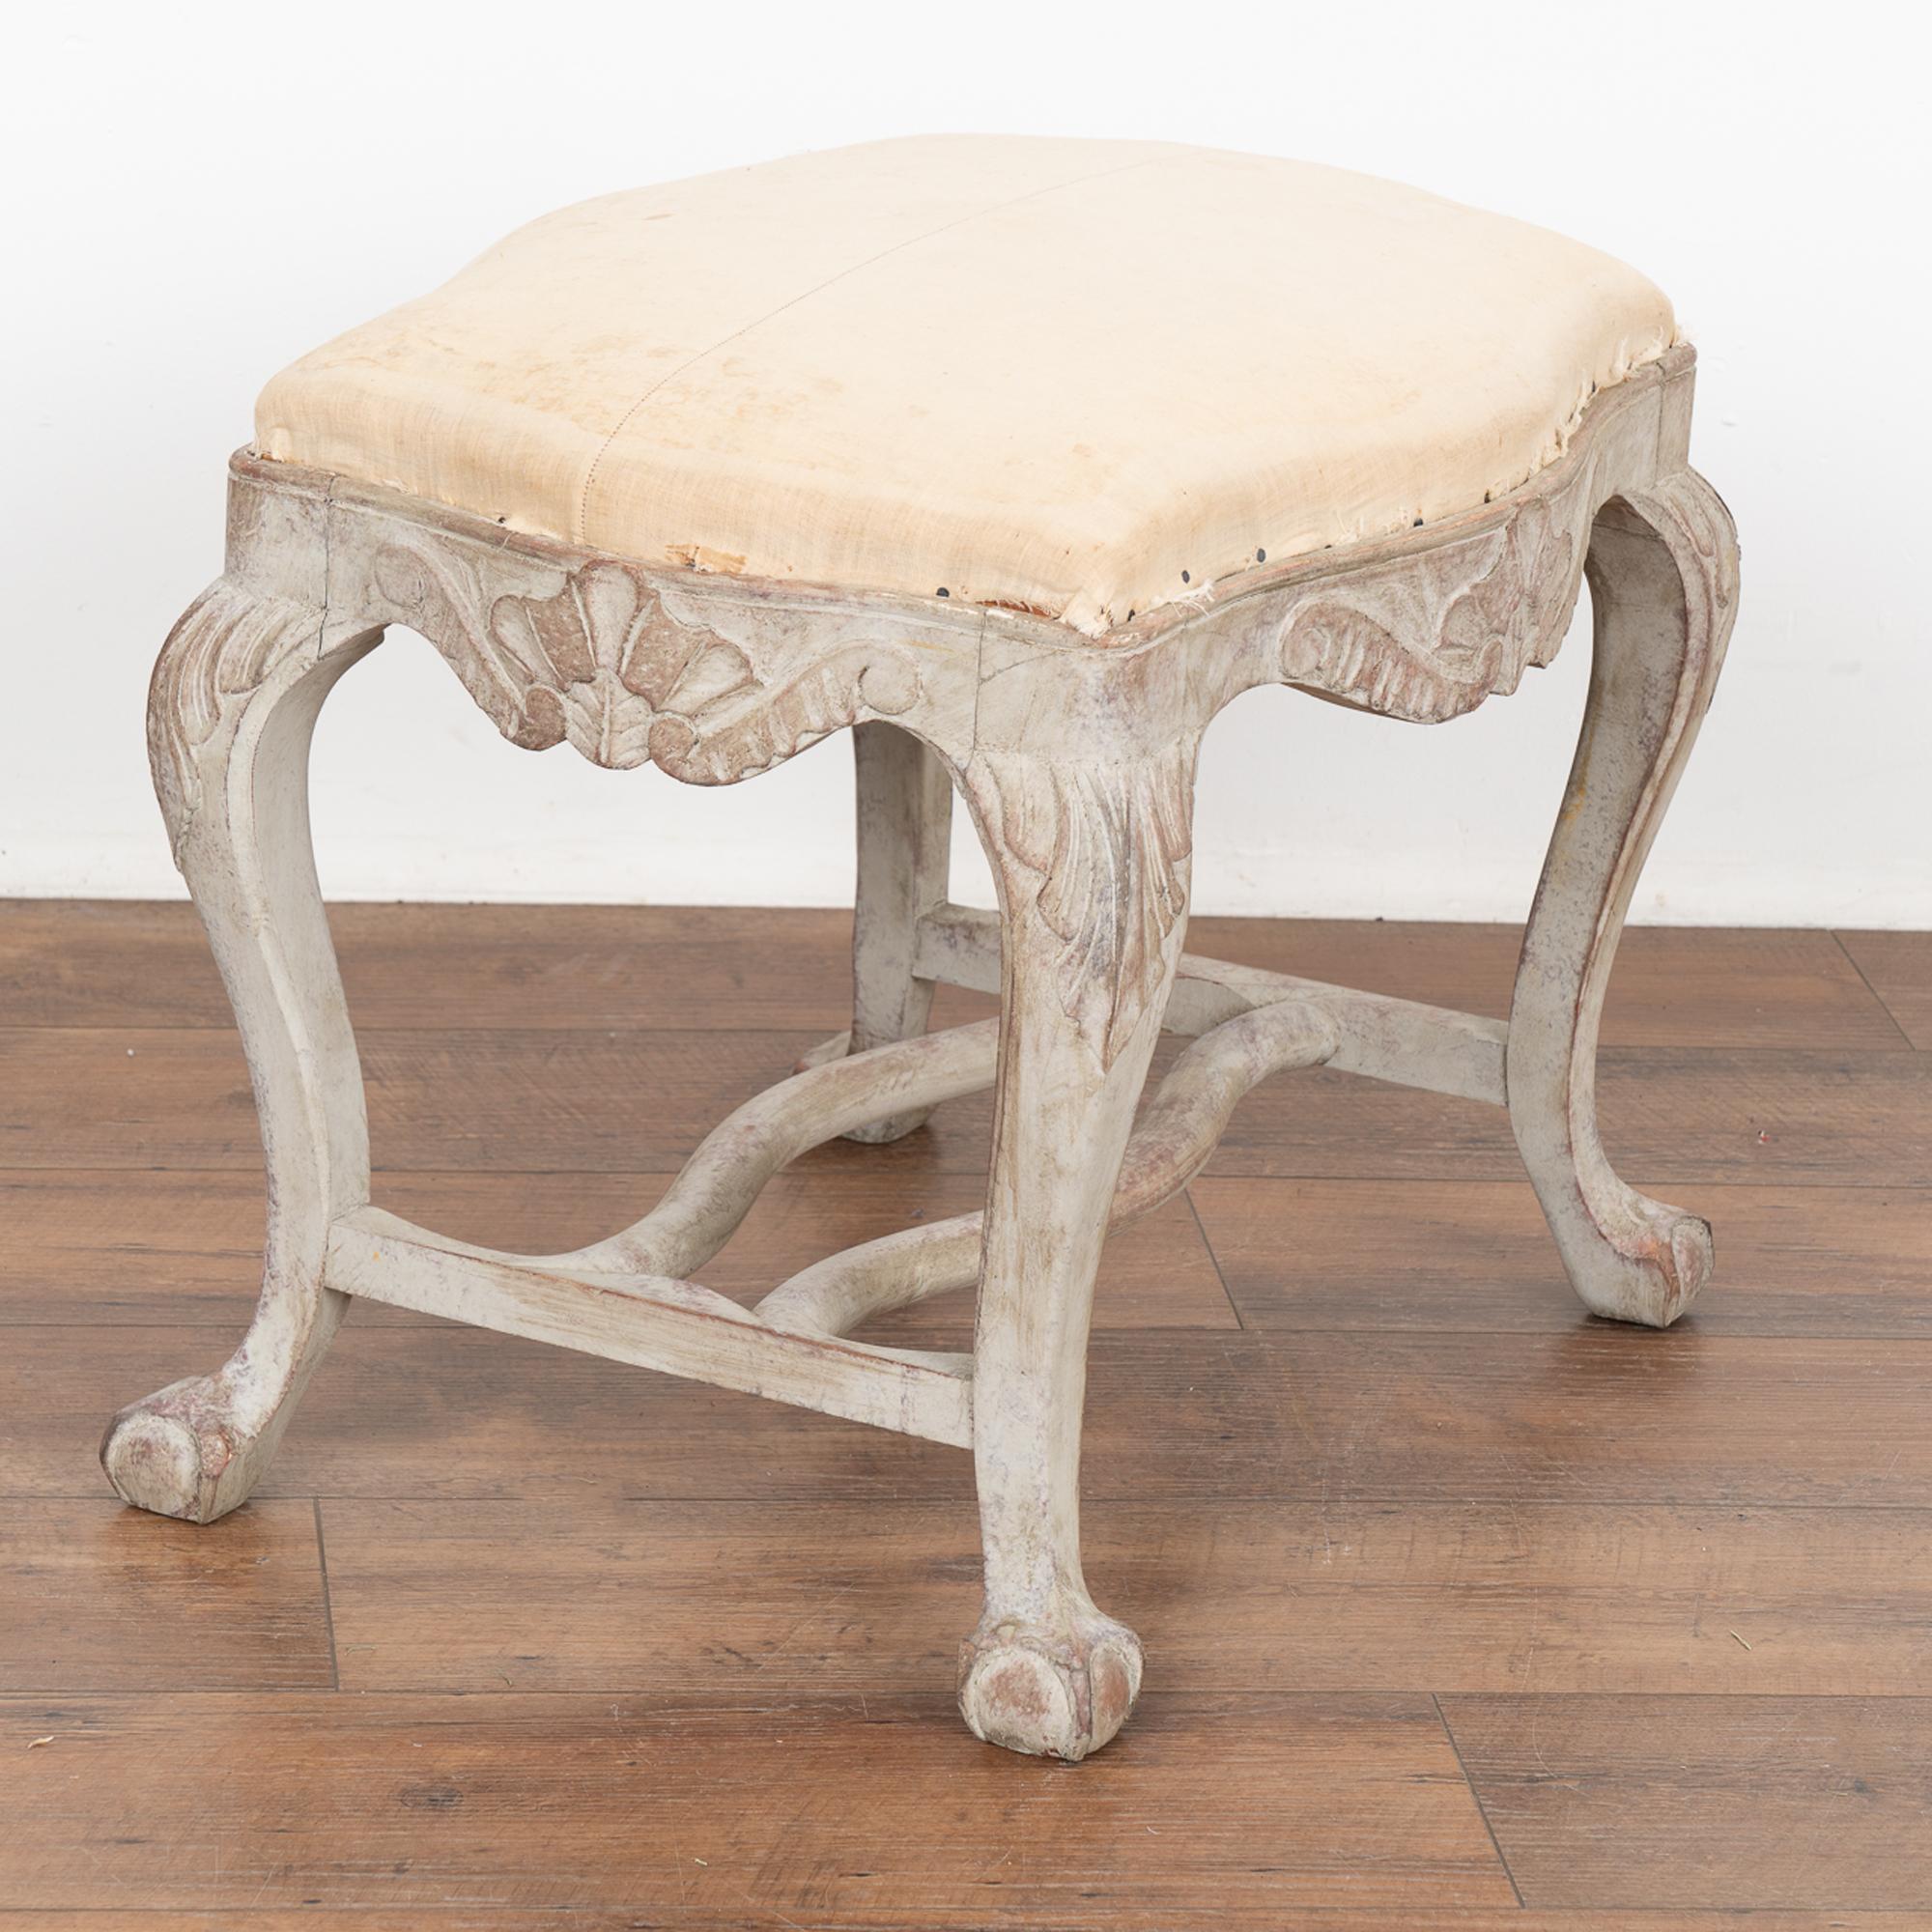 Swedish Gray Tabouret Stool With Cabriolet Legs, circa 1890 5